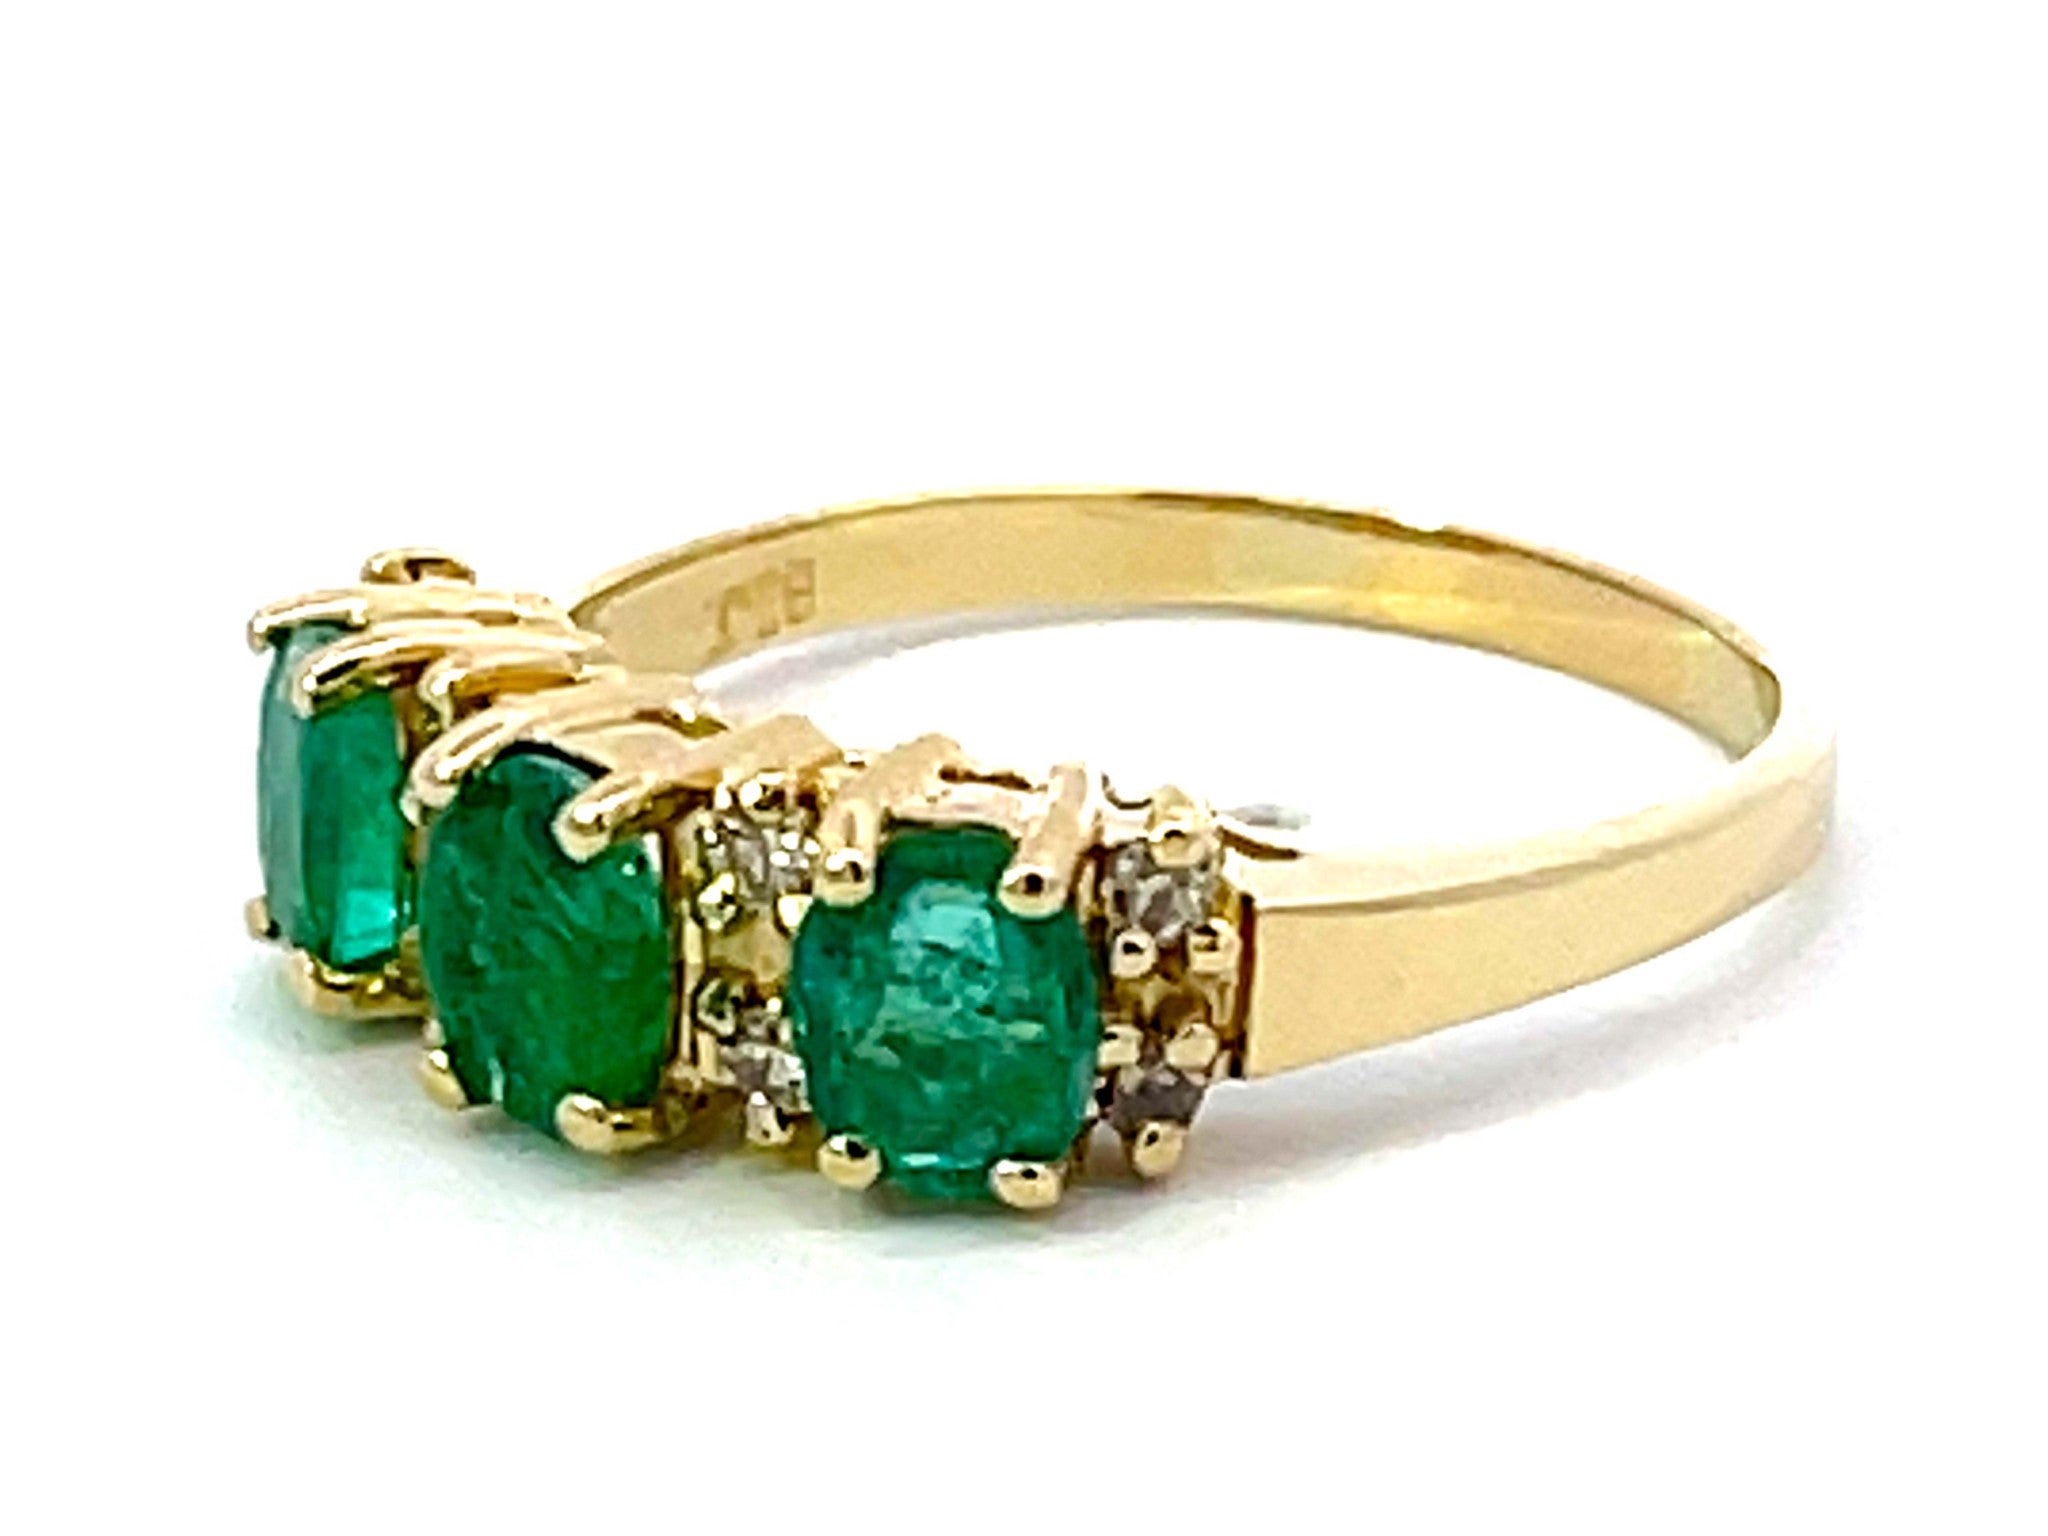 3 Oval Green Emerald and Diamond Band Ring in 14k Yellow Gold